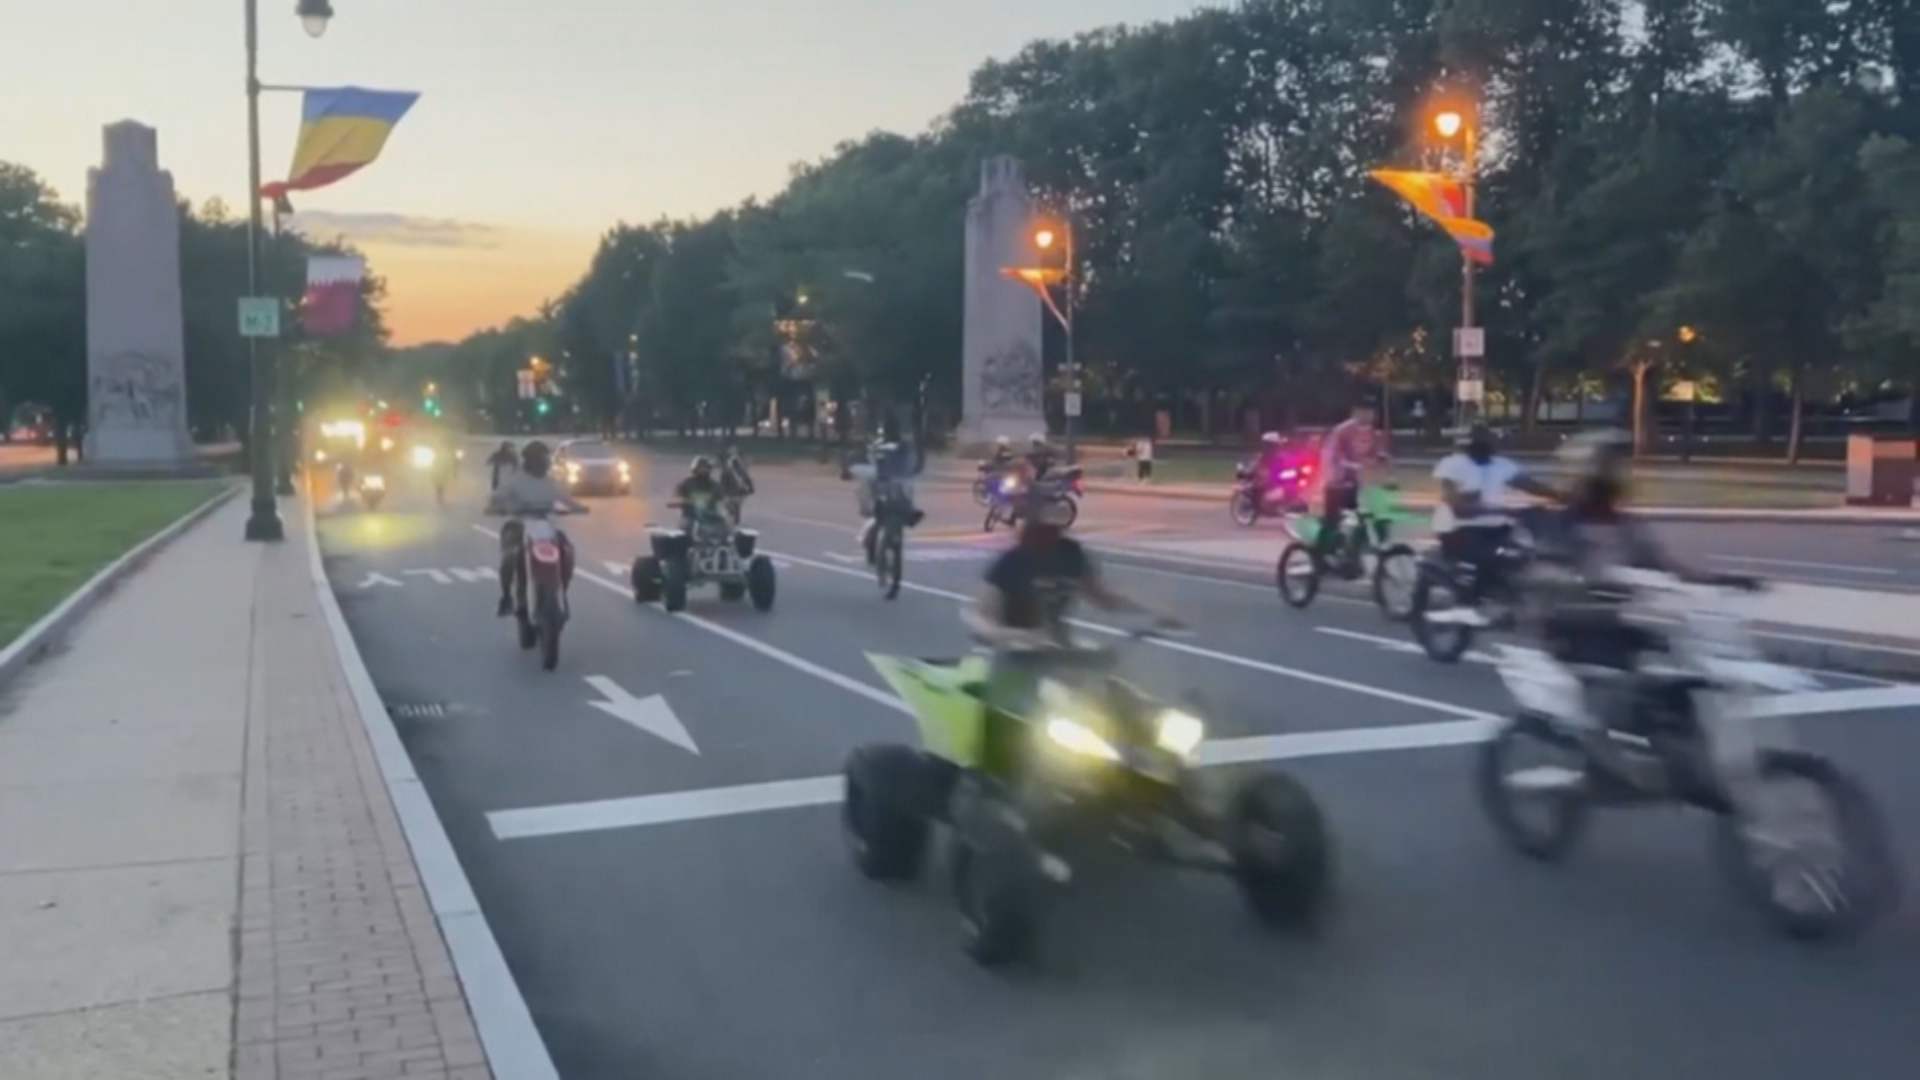 Philadelphia Police Publicly Push Back Against Out-Of-Control ATV, Dirt Bikes Near The Parkway